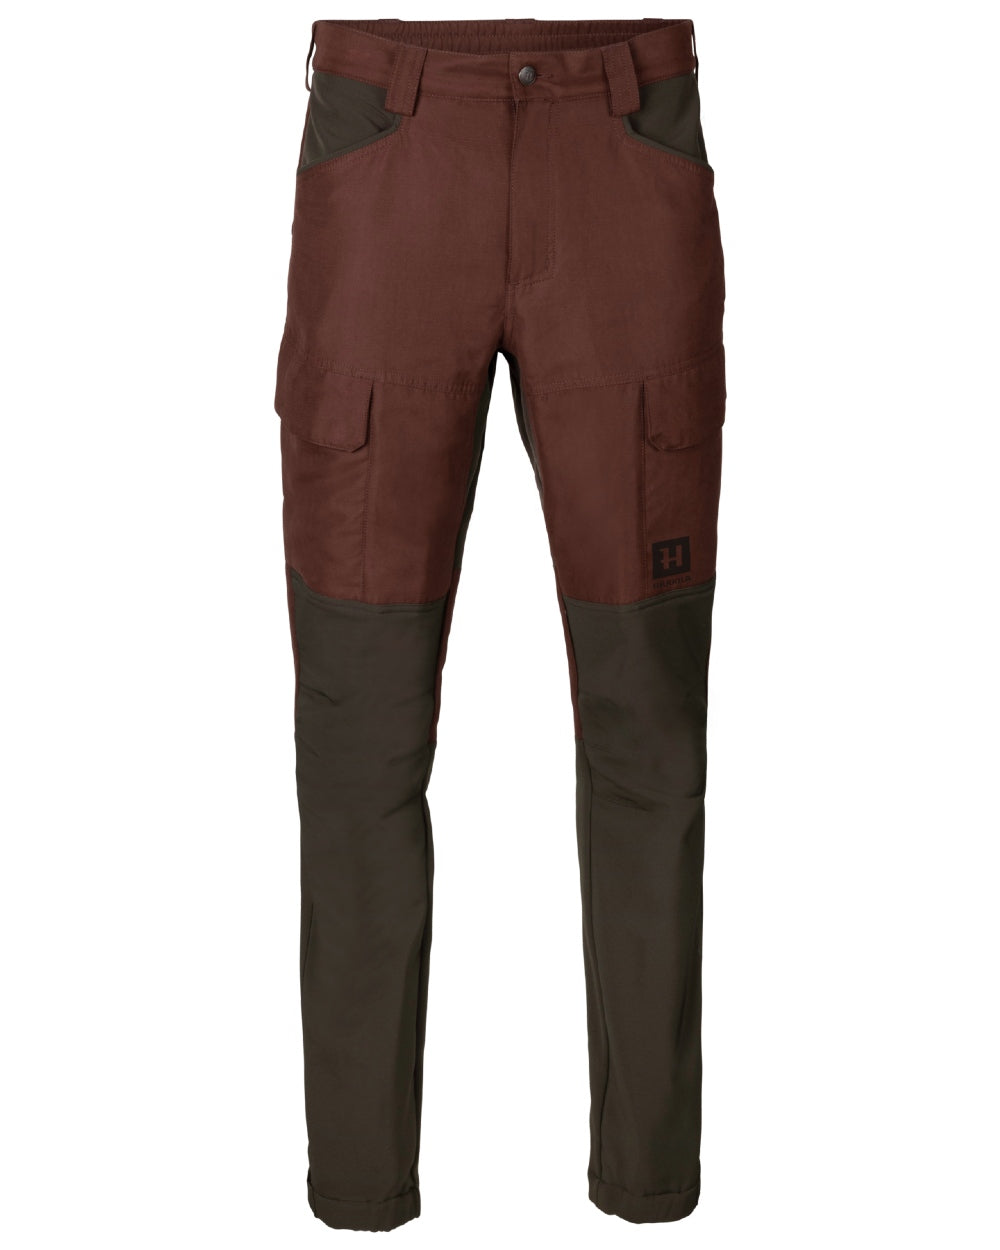 Bloodstone Red/Shadow Brown coloured Harkila Scandinavian Trousers on white background 